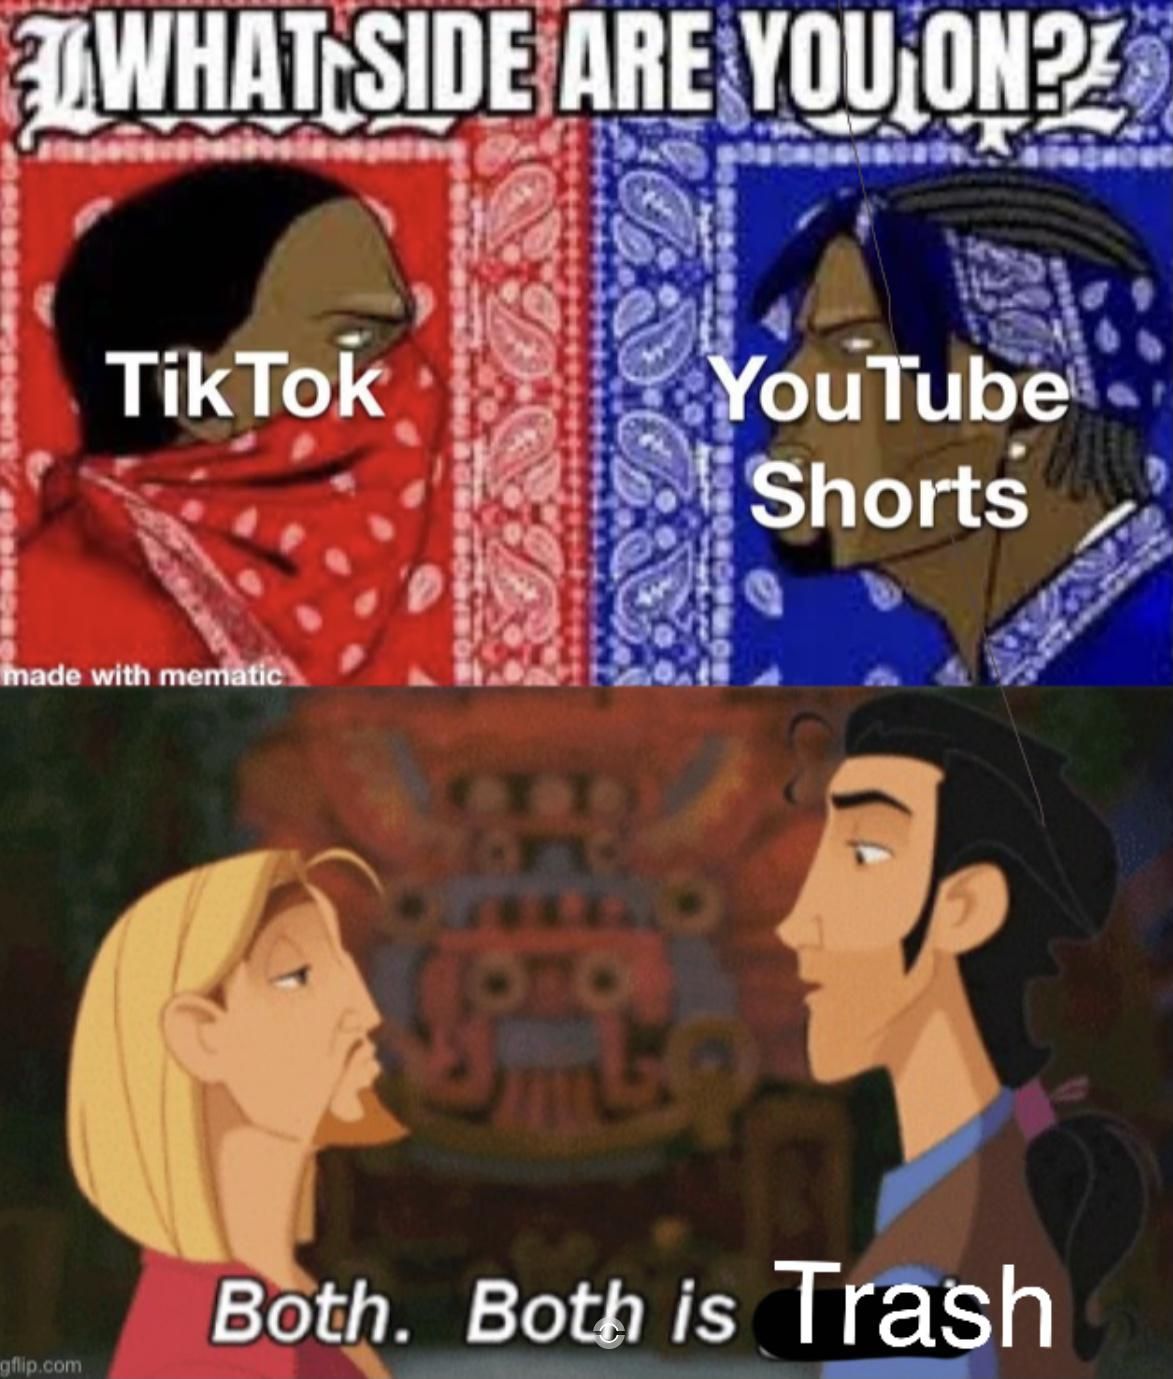 Just can‘t find the newest Video ‘cause everything is stupid shorts